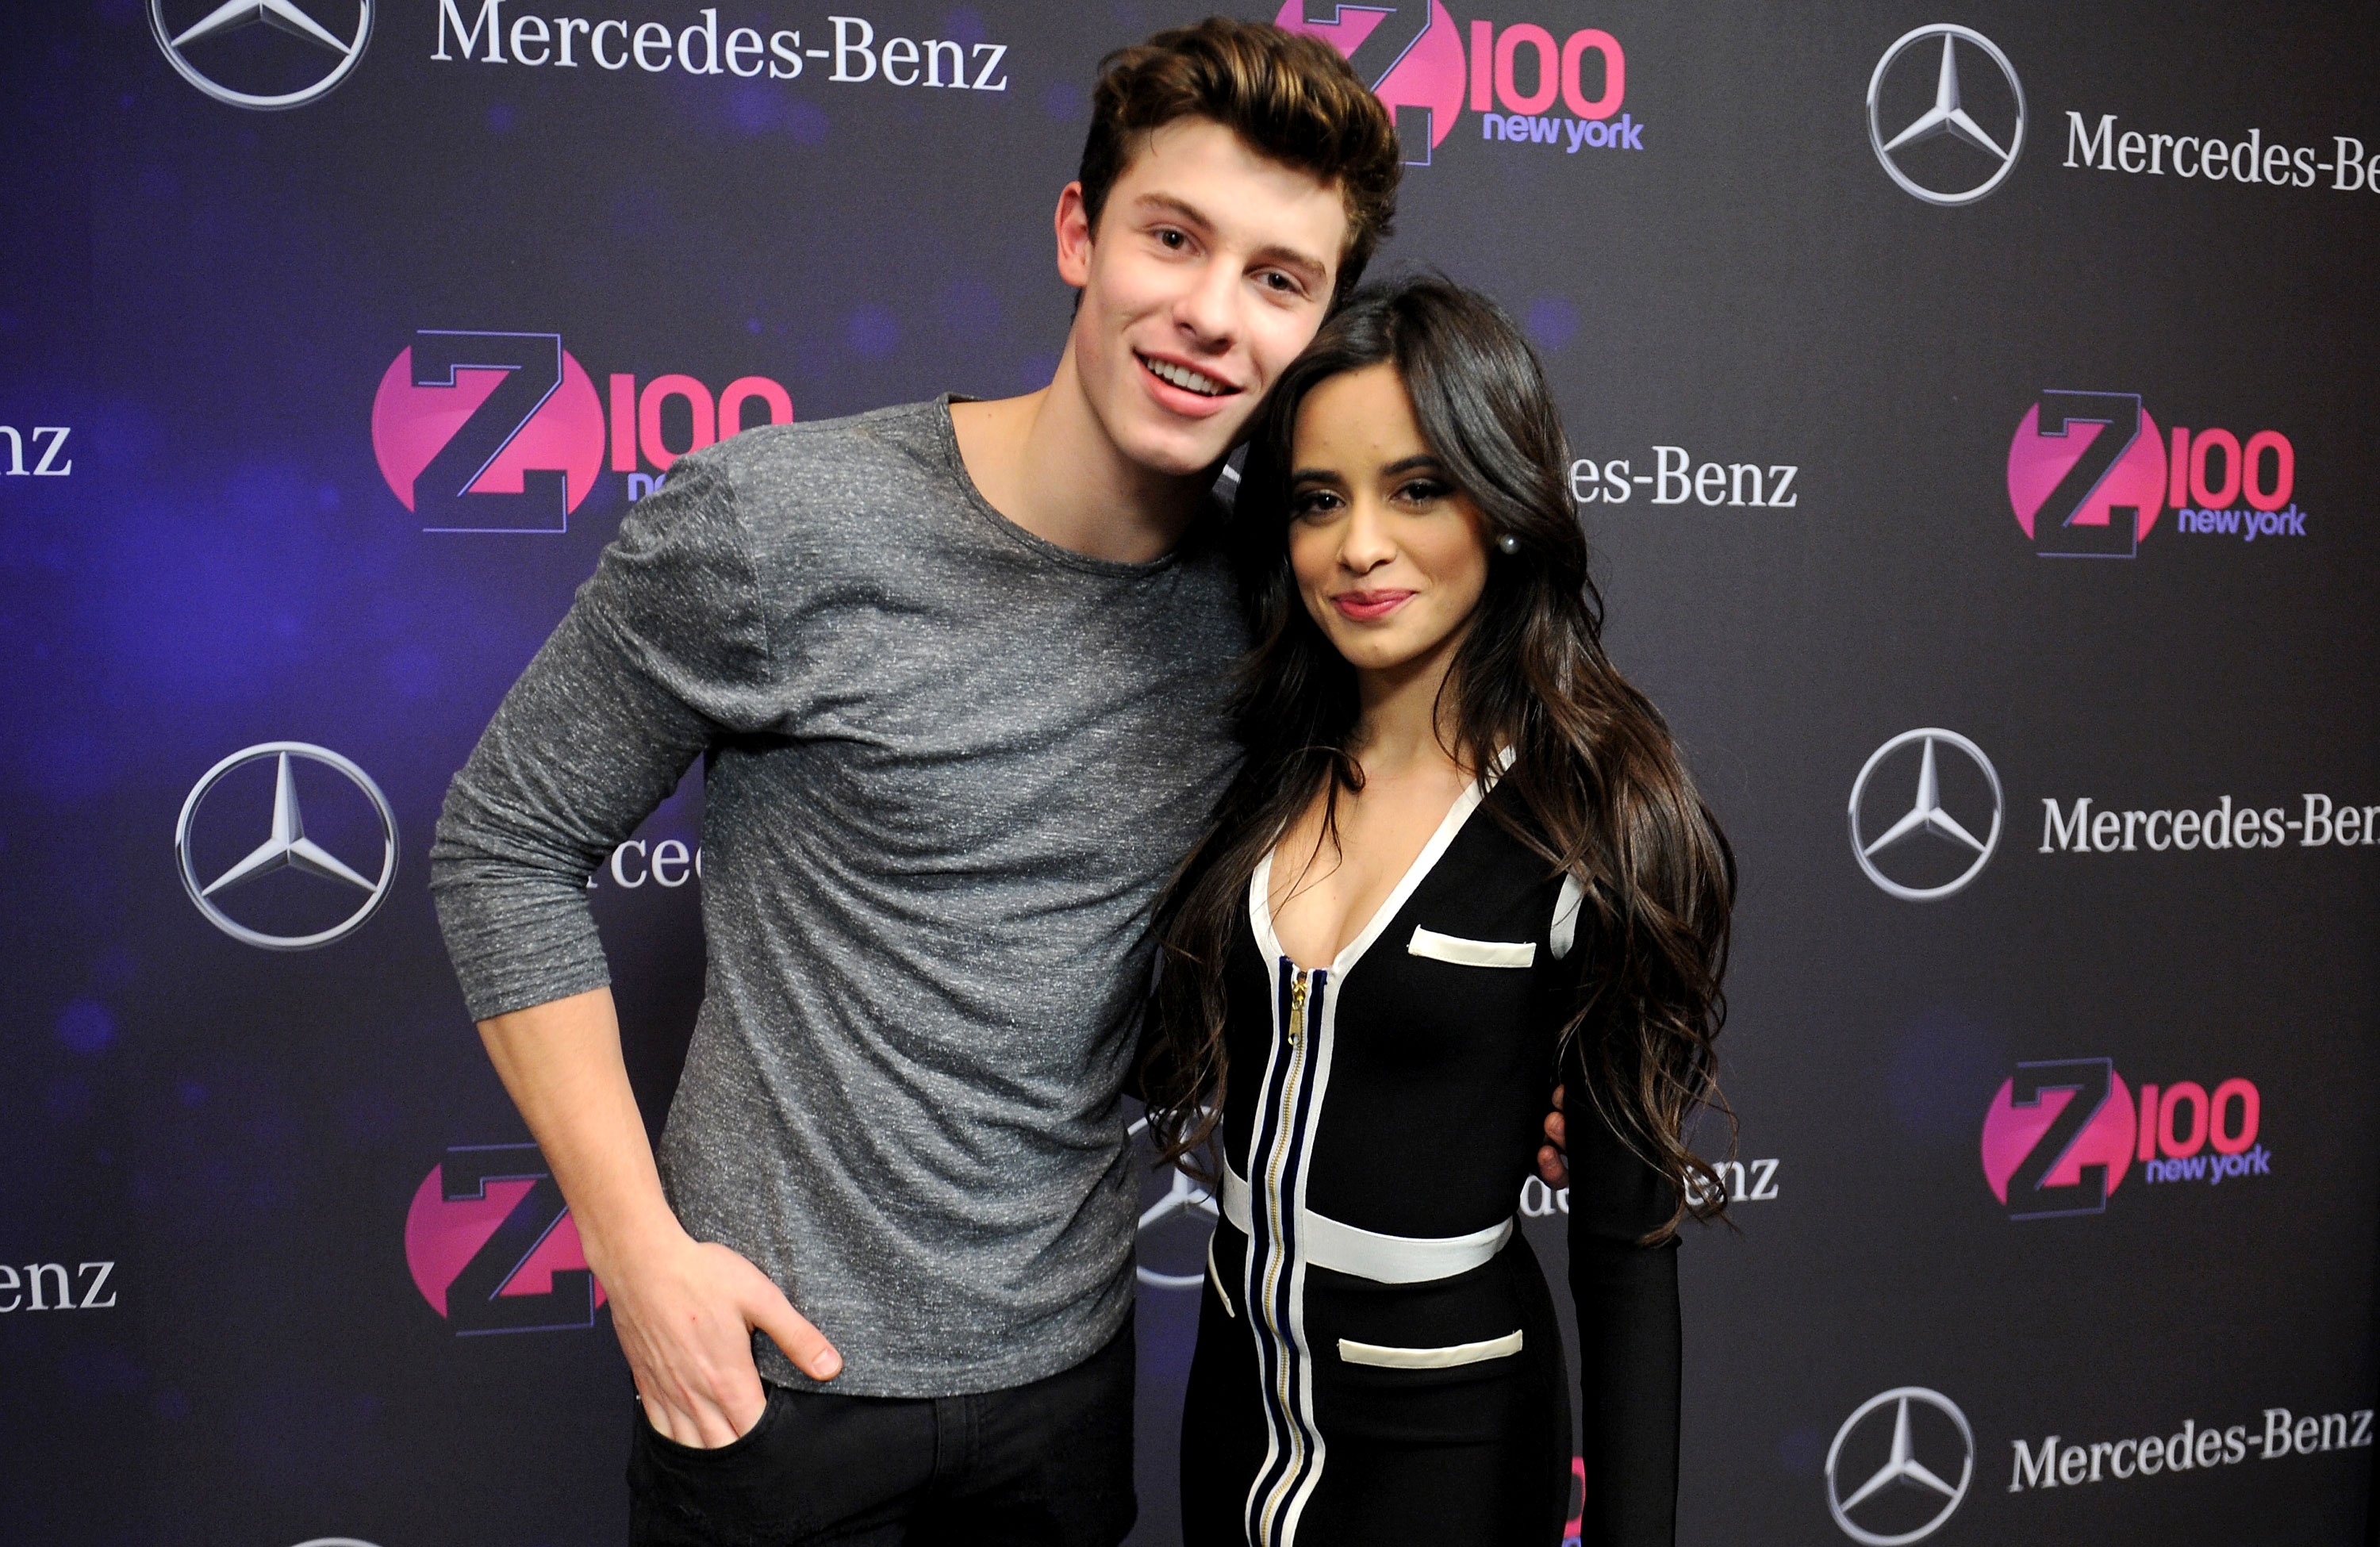 “We're always going to love each other”: Camila Cabello on Shawn Mendes